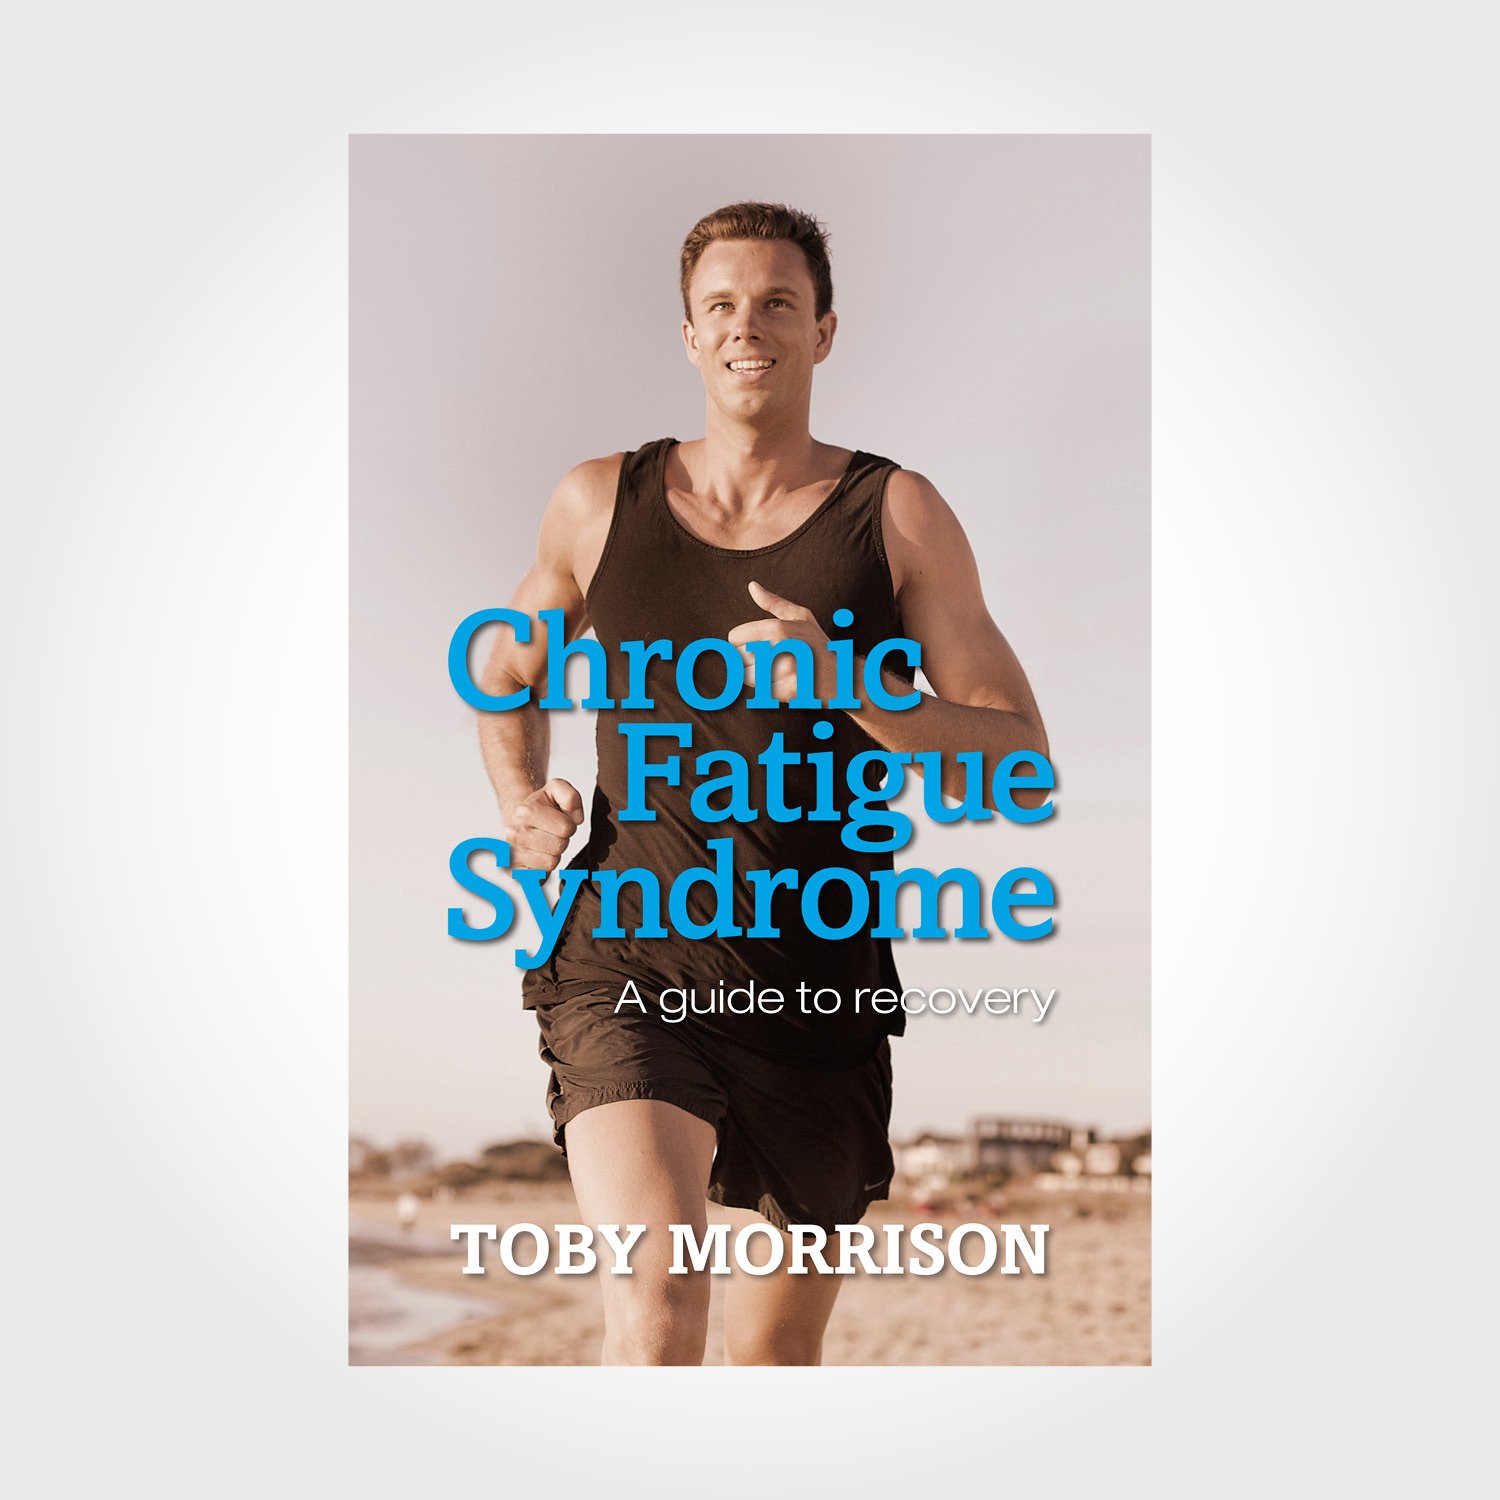 Chronic Fatigue Syndrome: A Guide to Recovery